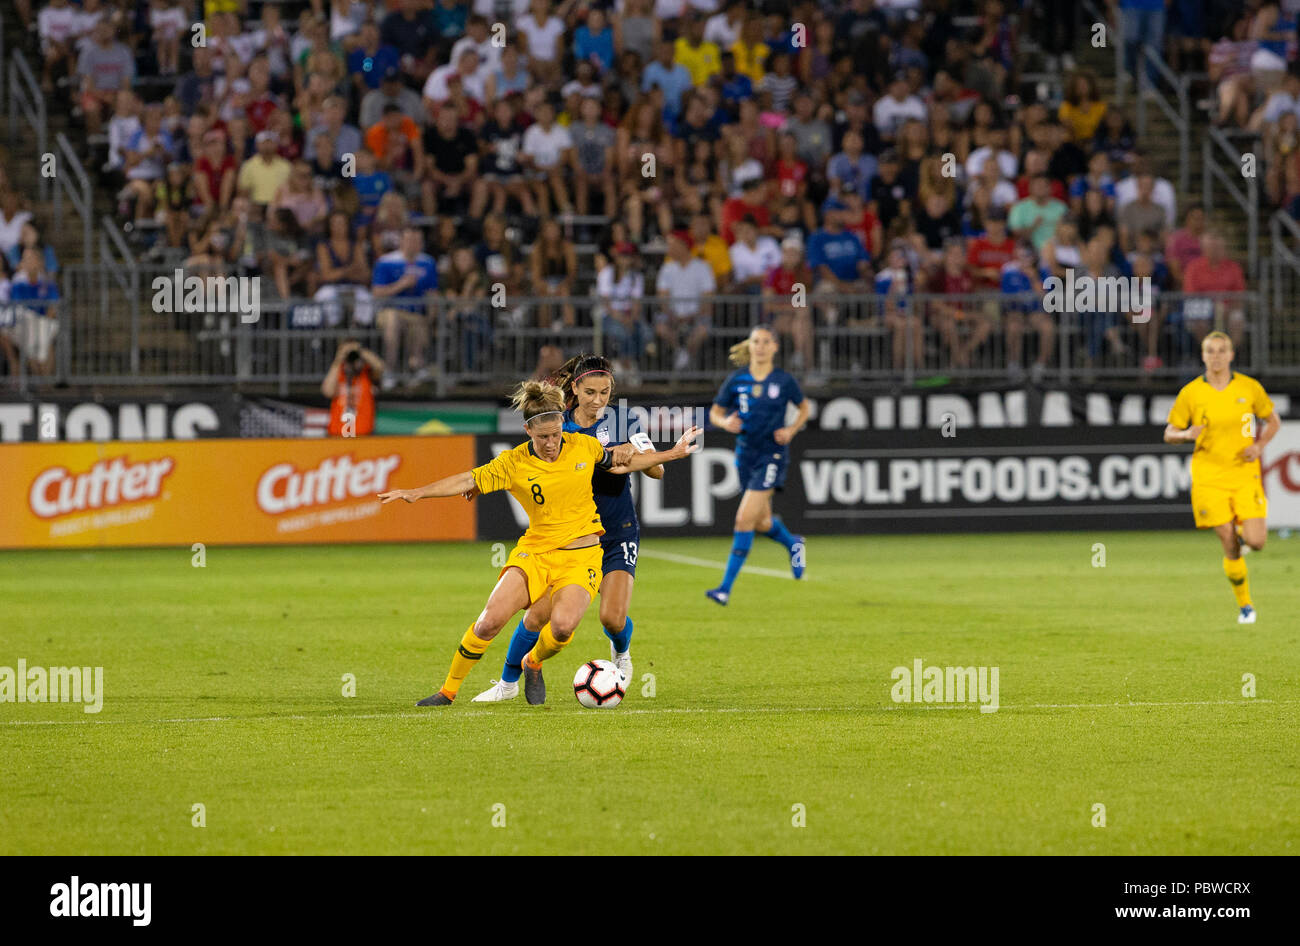 East Hartford, Connecticut, USA. July 29, 2018: Alex Morgan (13) of USA and Elise Kellond-Knight (8) of Australia fight for ball during Tournament of Nations game at Pratt & Whitney stadium Game ended in draw 1 - 1 Credit: lev radin/Alamy Live News Stock Photo